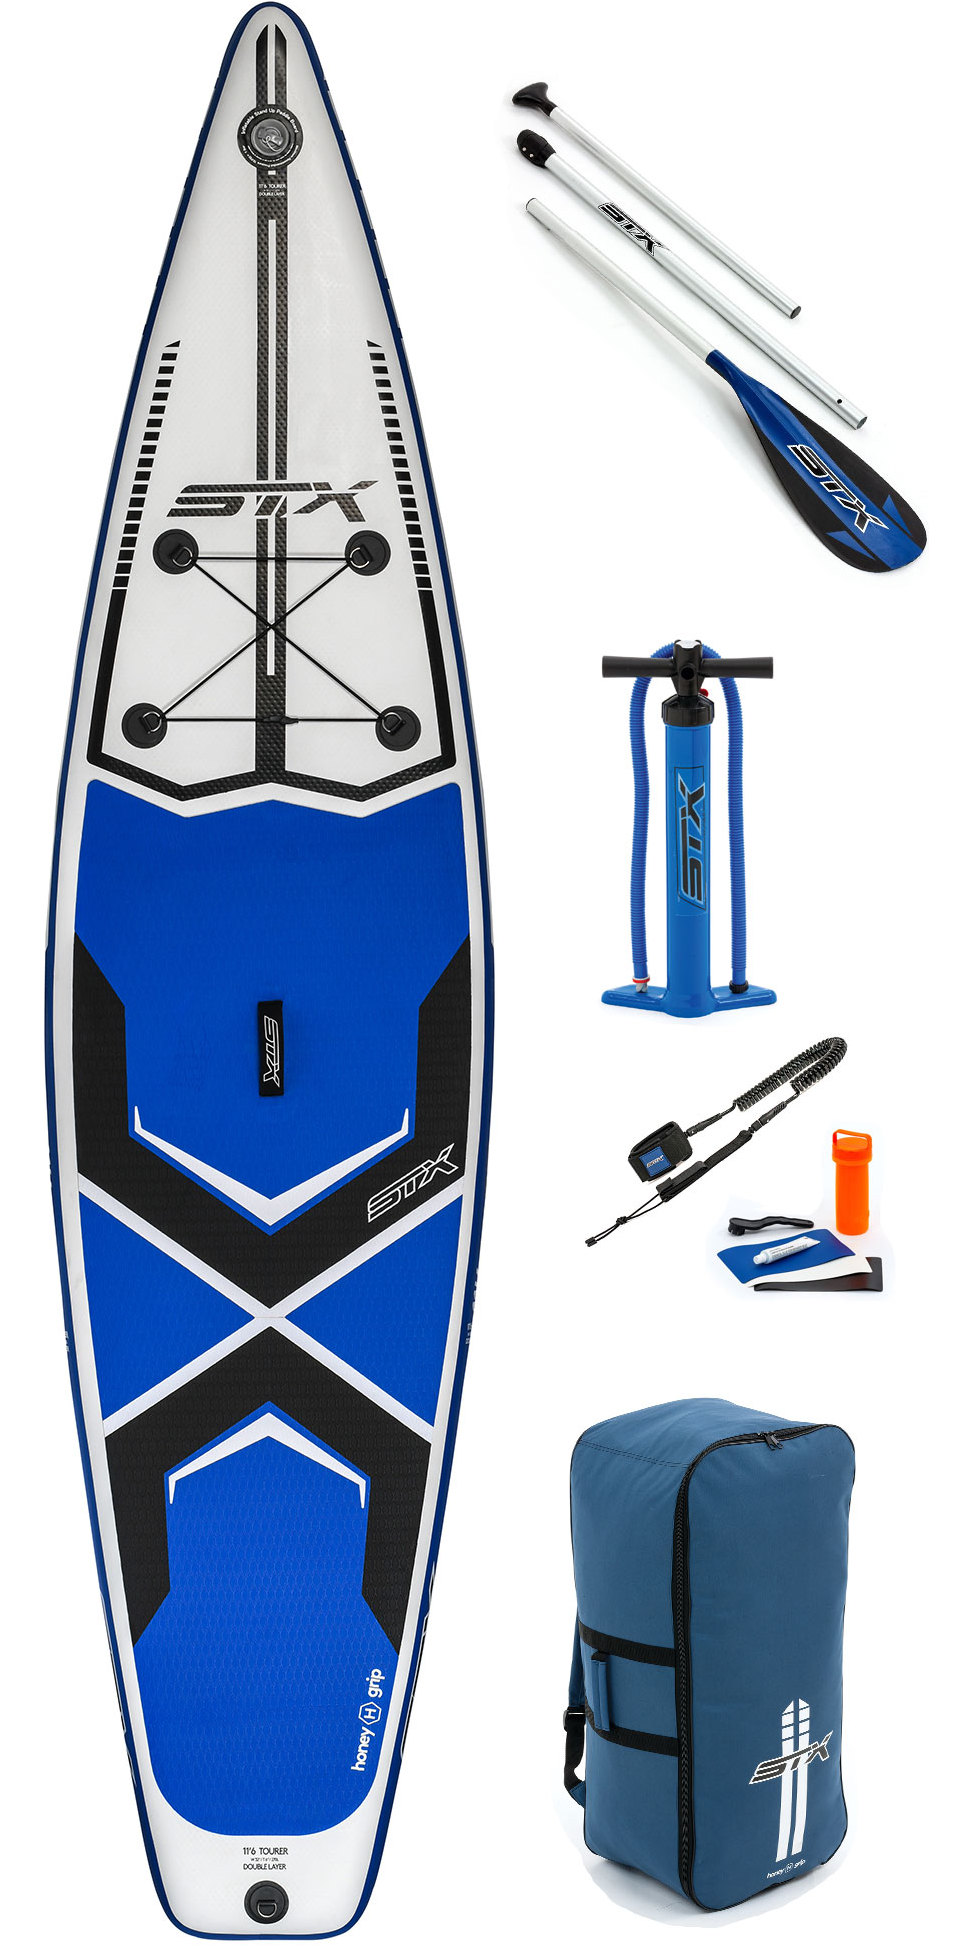 Freein Adjustable Stand Up Paddle Board Paddle Black Palm Grip